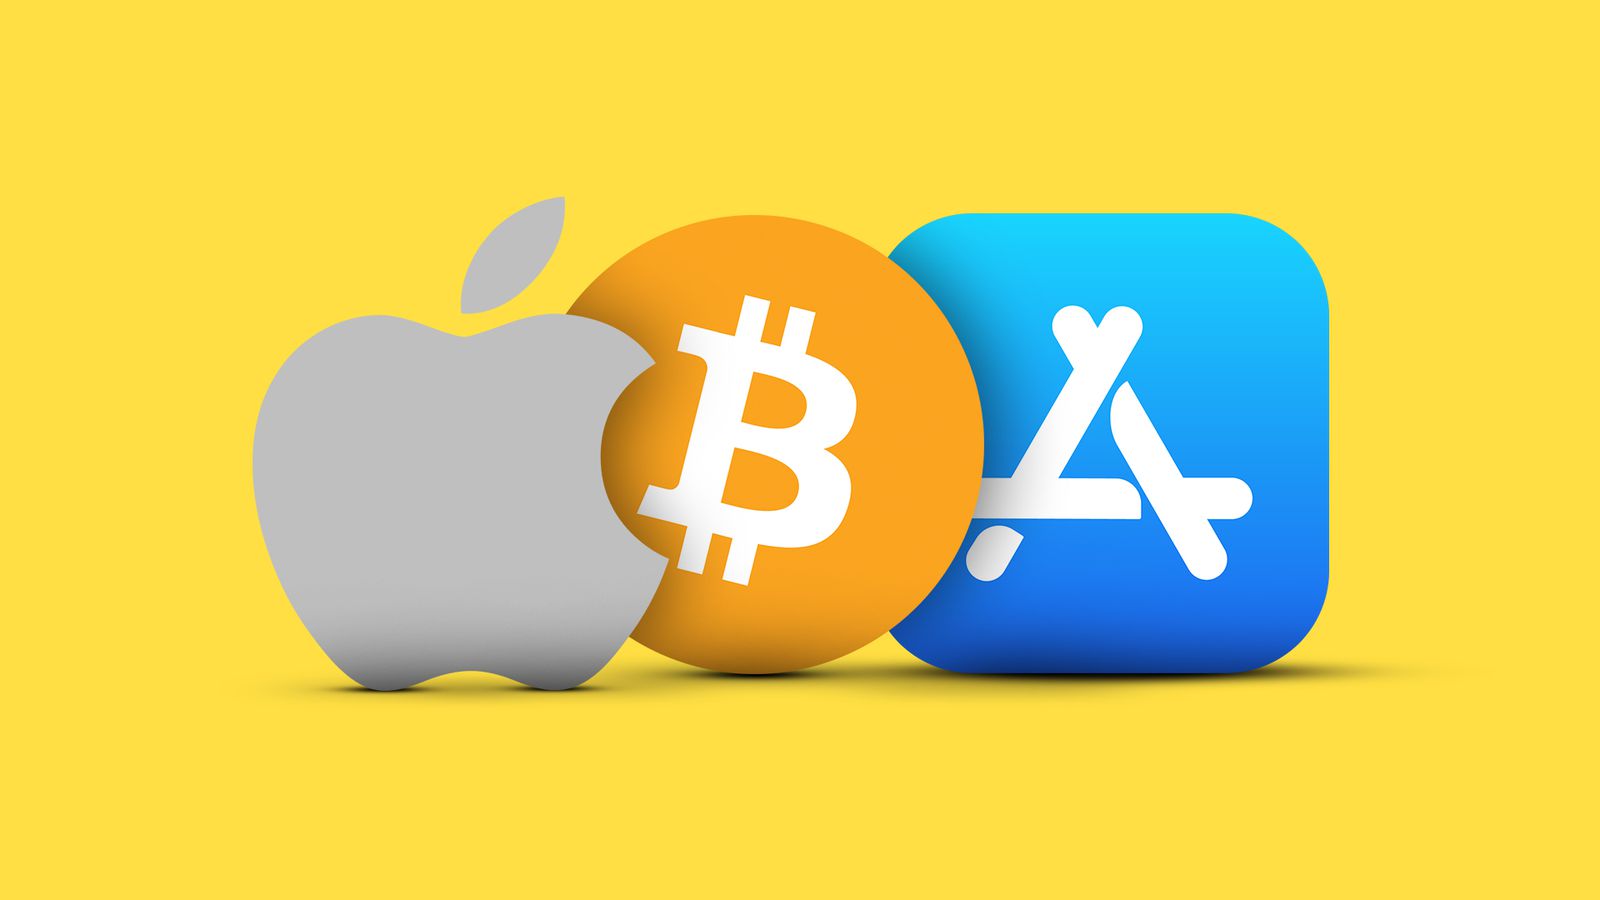 Apple coin cryptocurrency investing in yourself is the best thing you can do